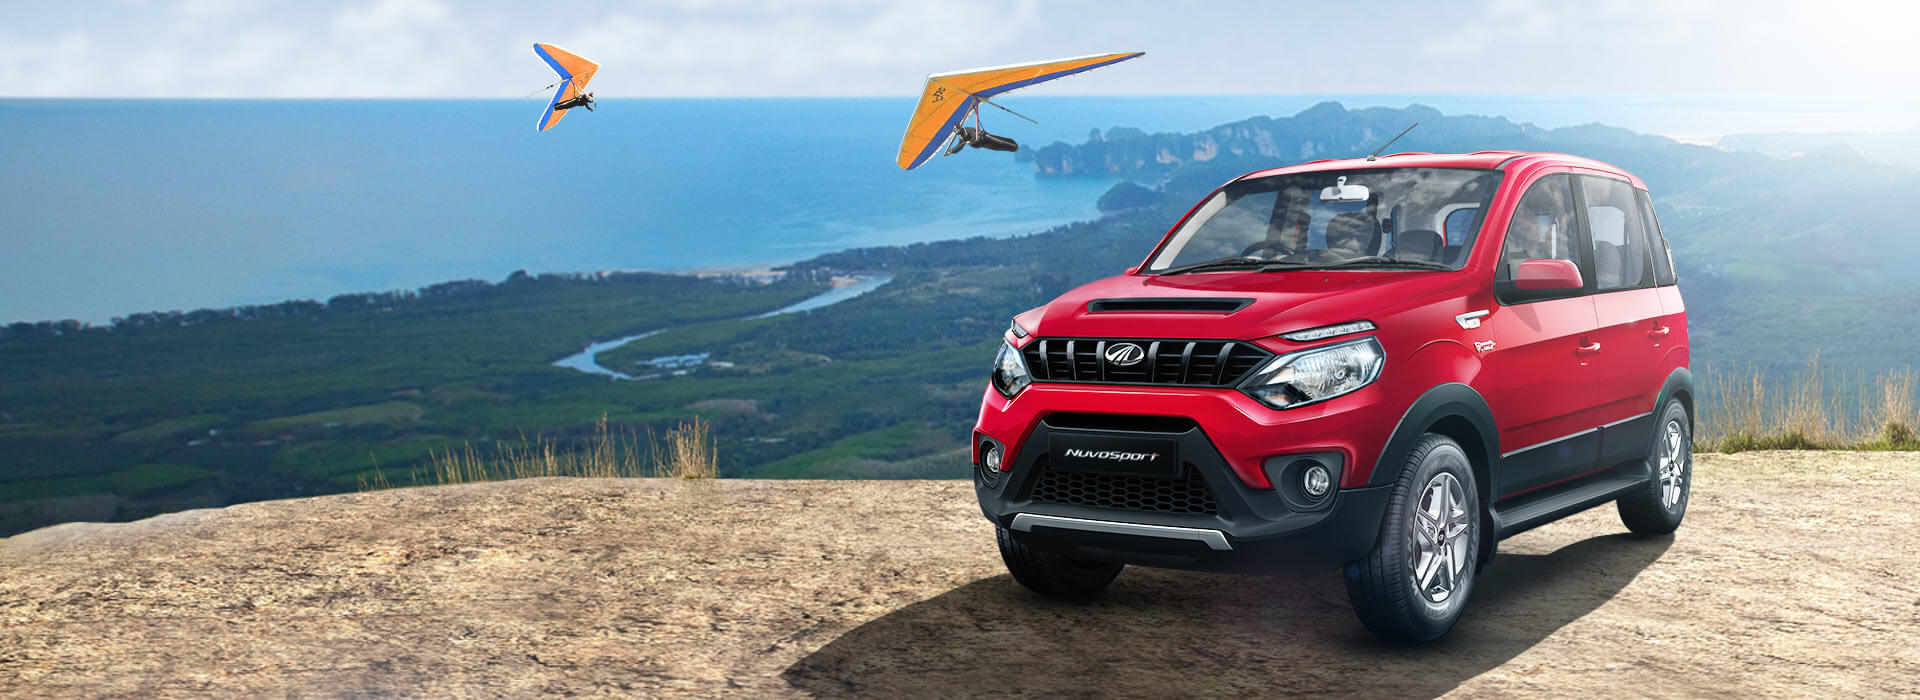 Top 6 Facts About the Mahindra NuvoSport